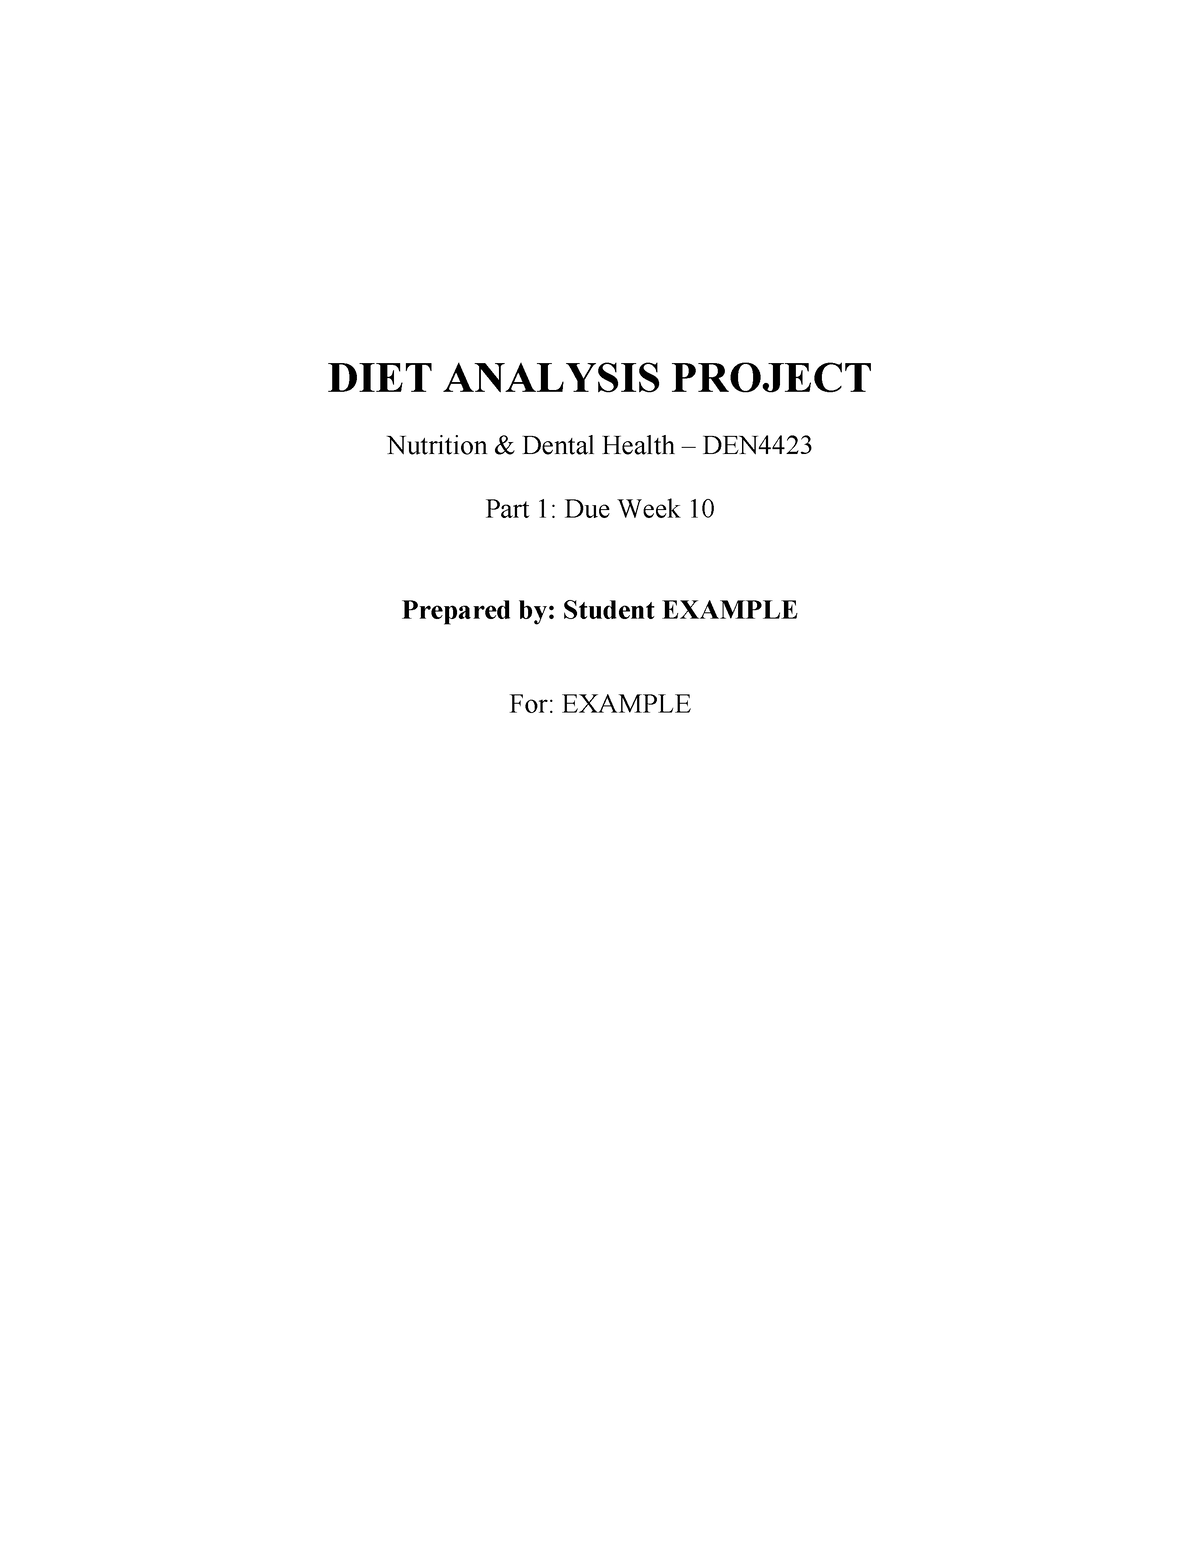 student-example-diet-analysis-project-part-i-diet-analysis